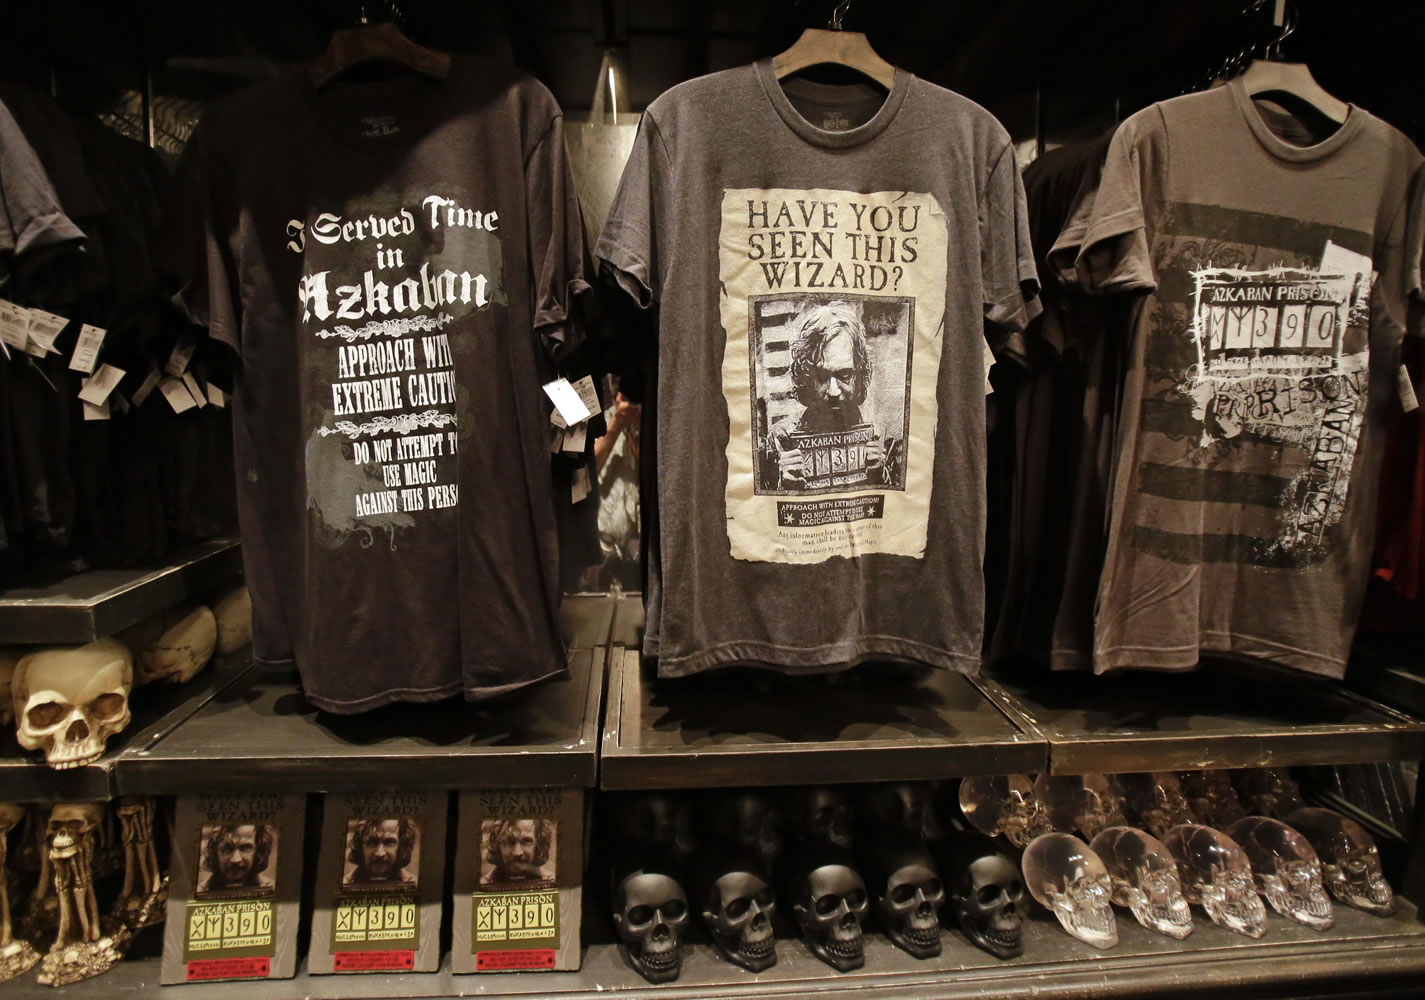 T-shirts and ceramic skulls are displayed at Borgin and Burkes in Knockturn Alley during a preview Thursday of Diagon Alley at the Wizarding World of Harry Potter at Universal Orlando in Orlando, Fla.